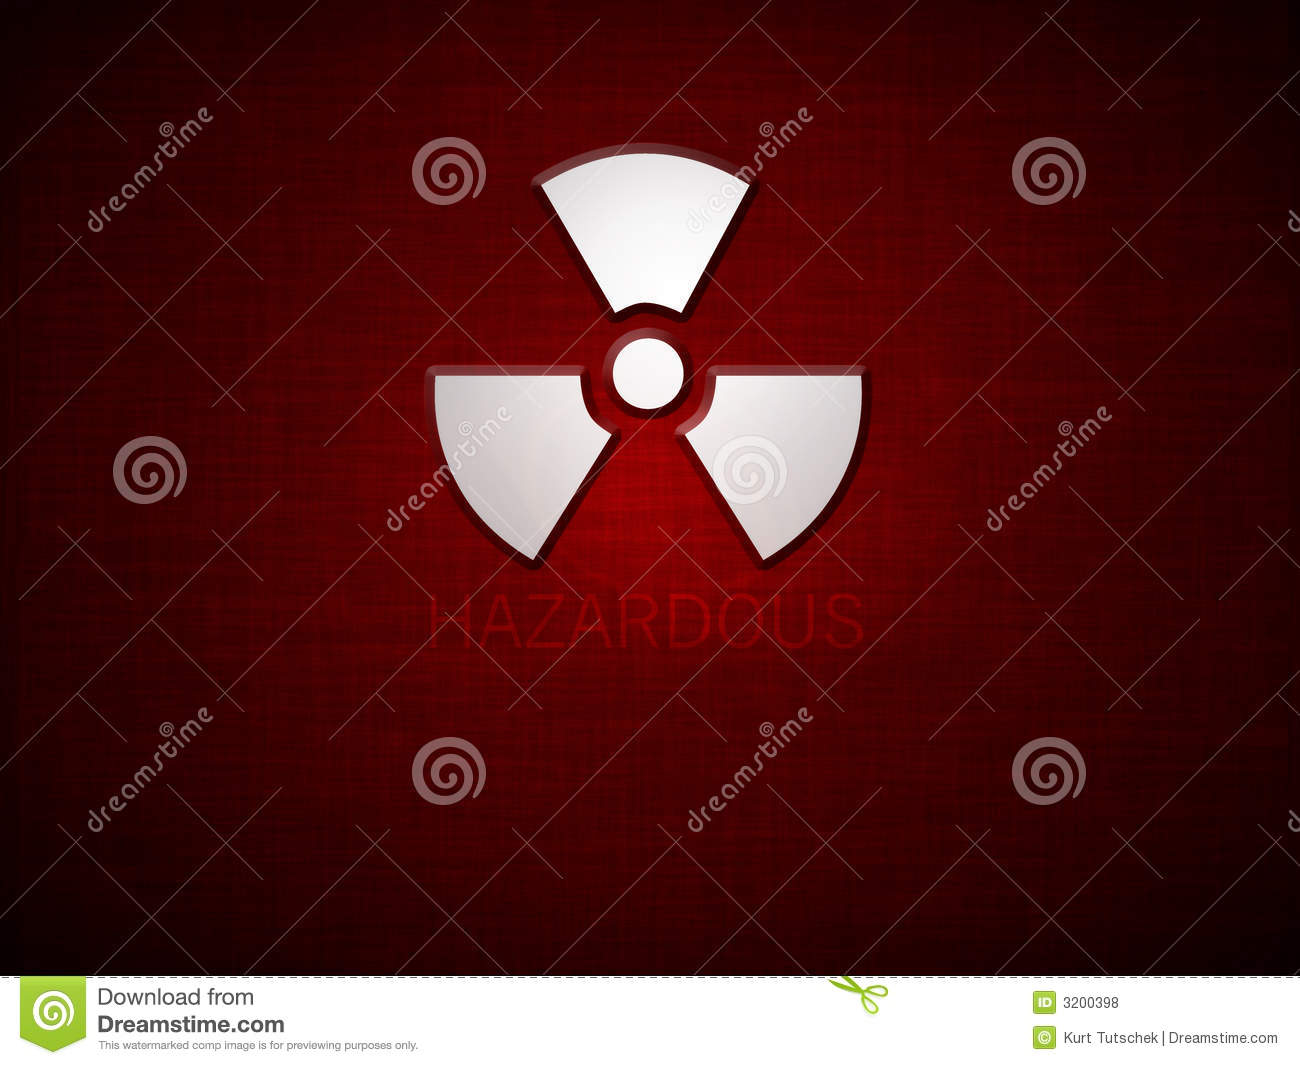 Red Grunge Background With Sign And Text Saying Hazardous 